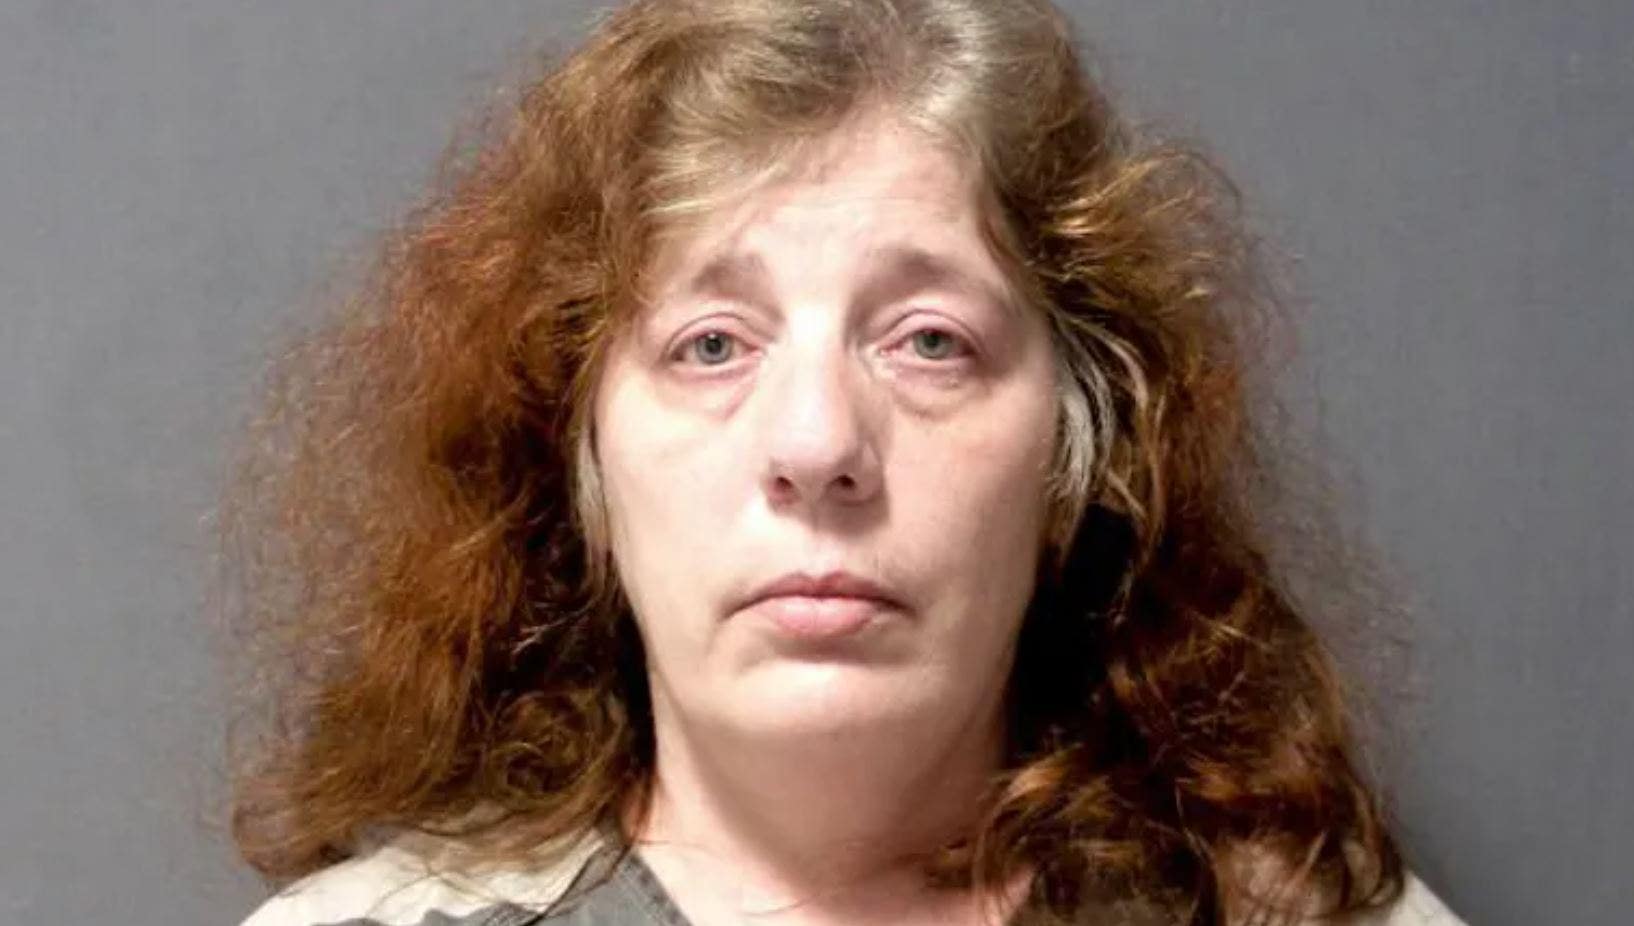 Michigan woman used fake 'Rent-A-Hitman' website in bid to have ex-husband killed, authorities say